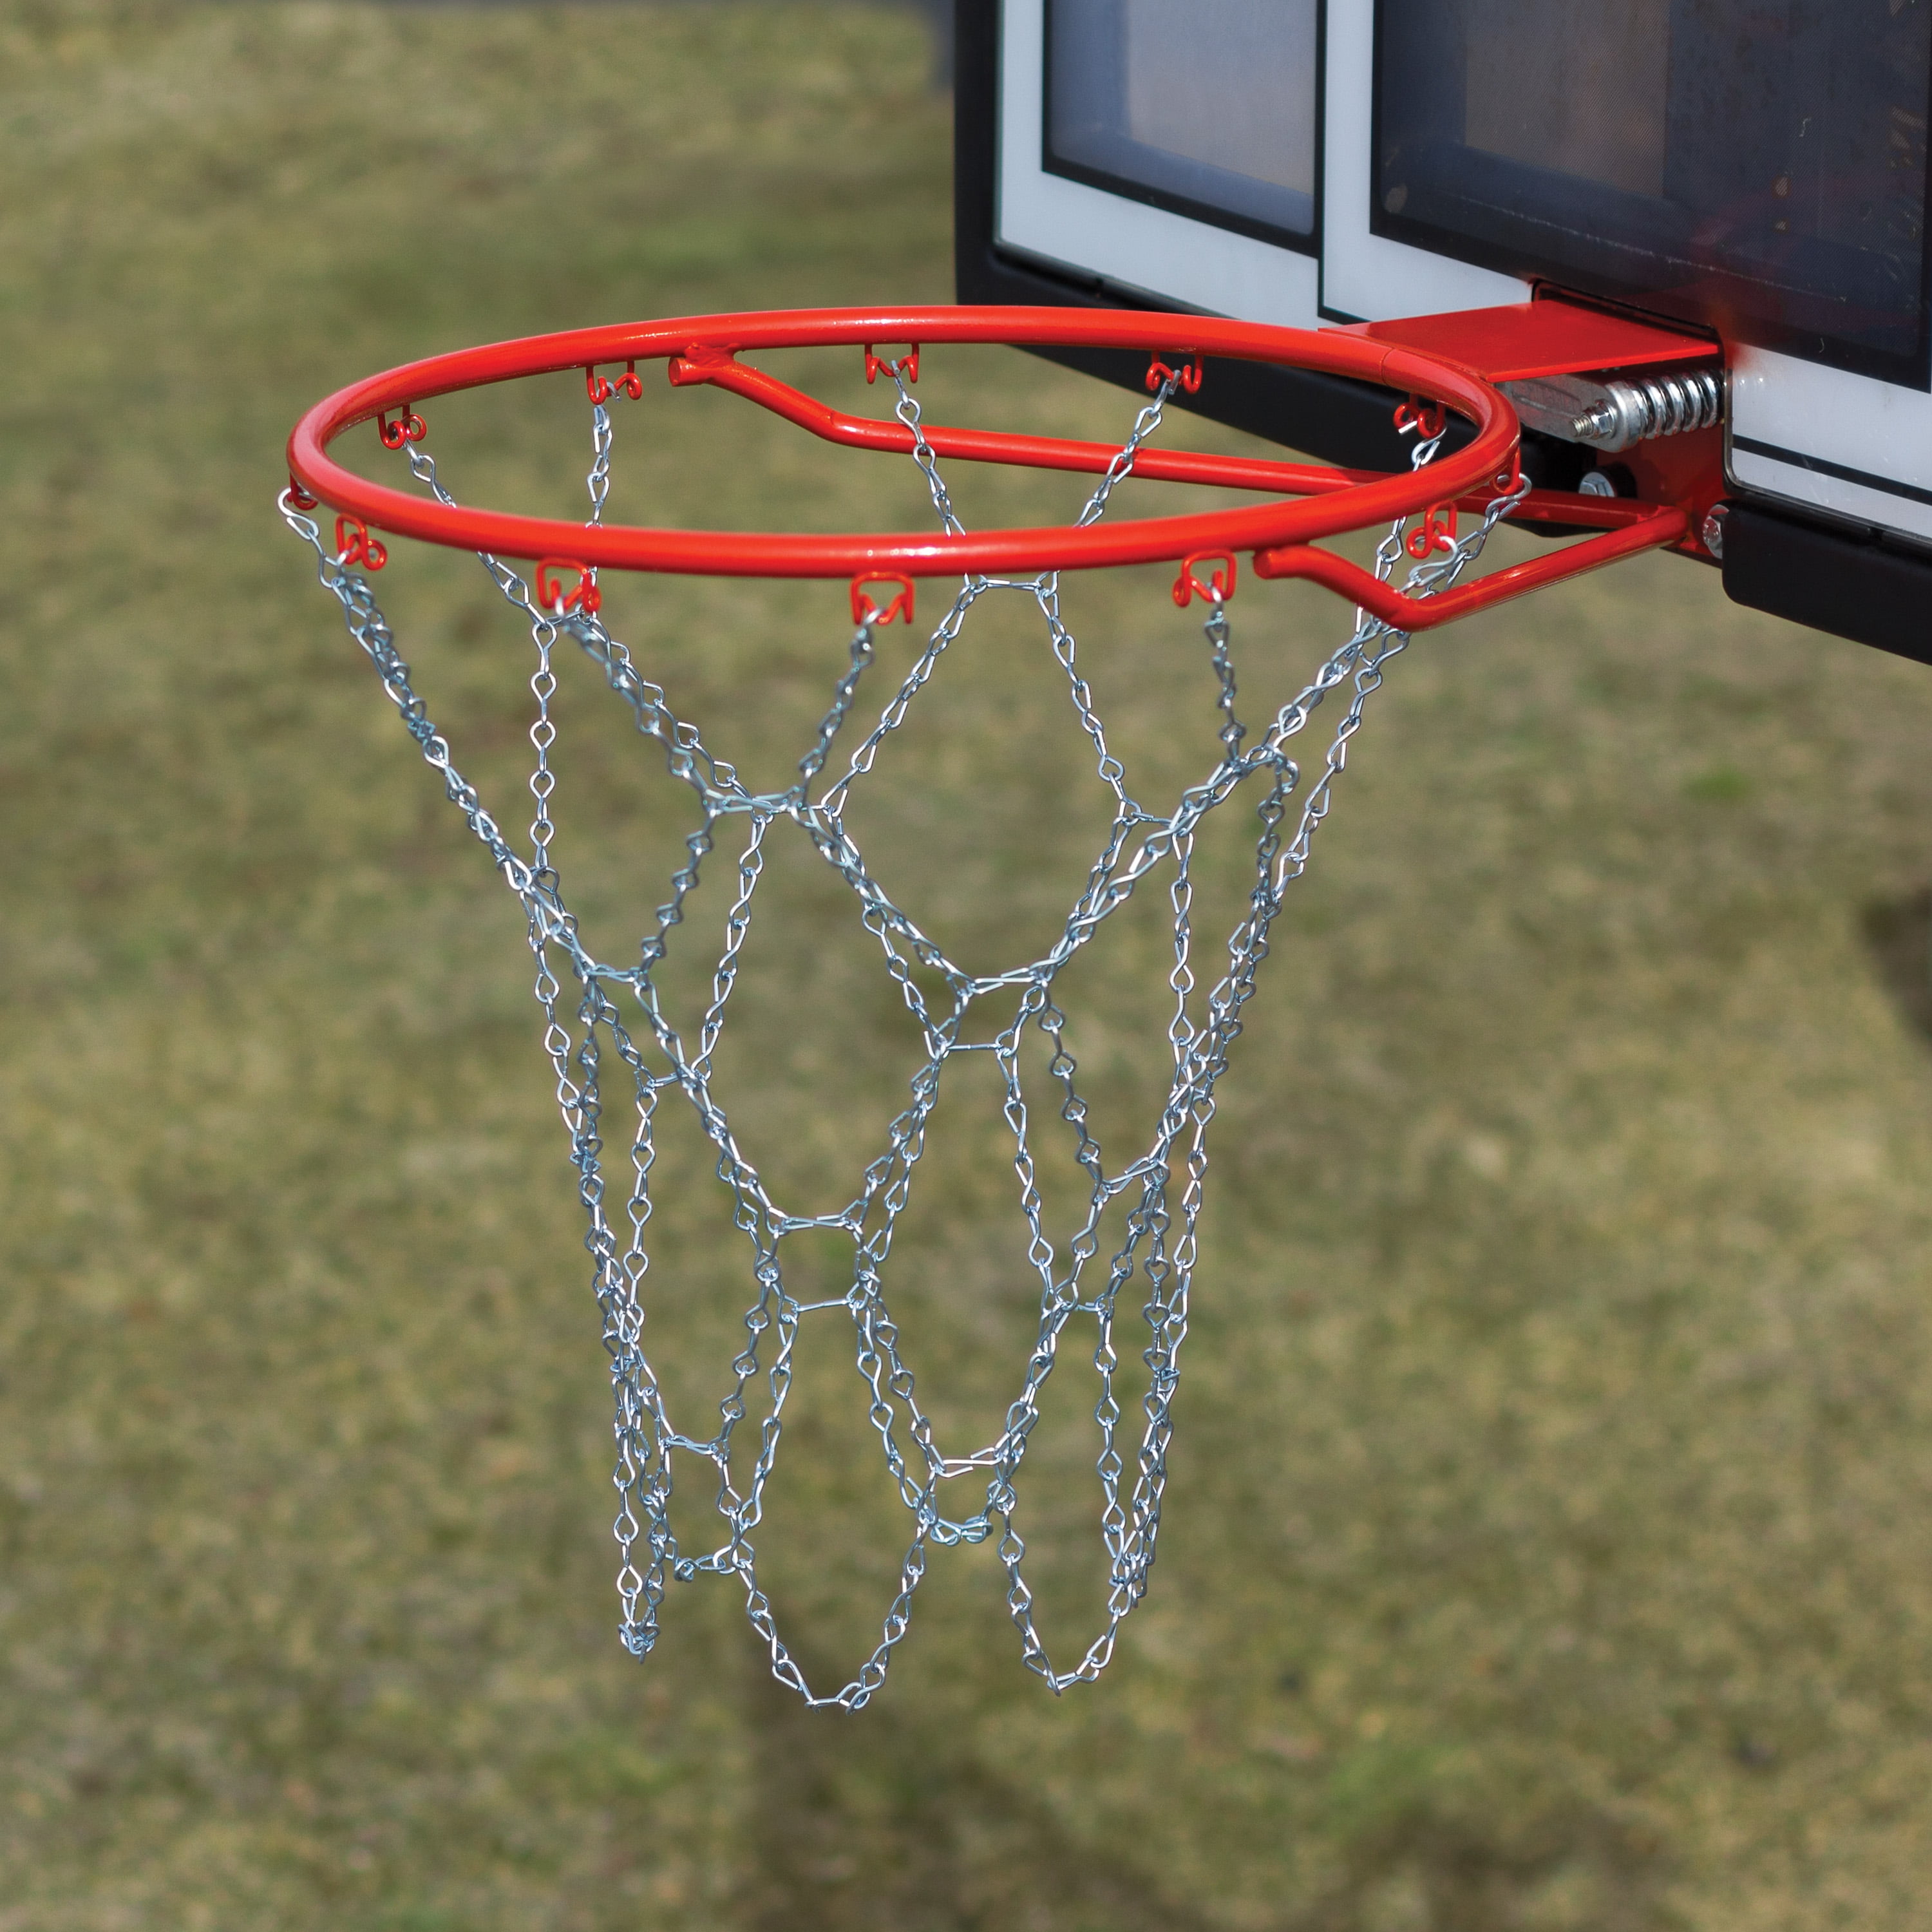 Outdoor Basketball Chain Net Heavy Duty Durable Replacement Net HO 